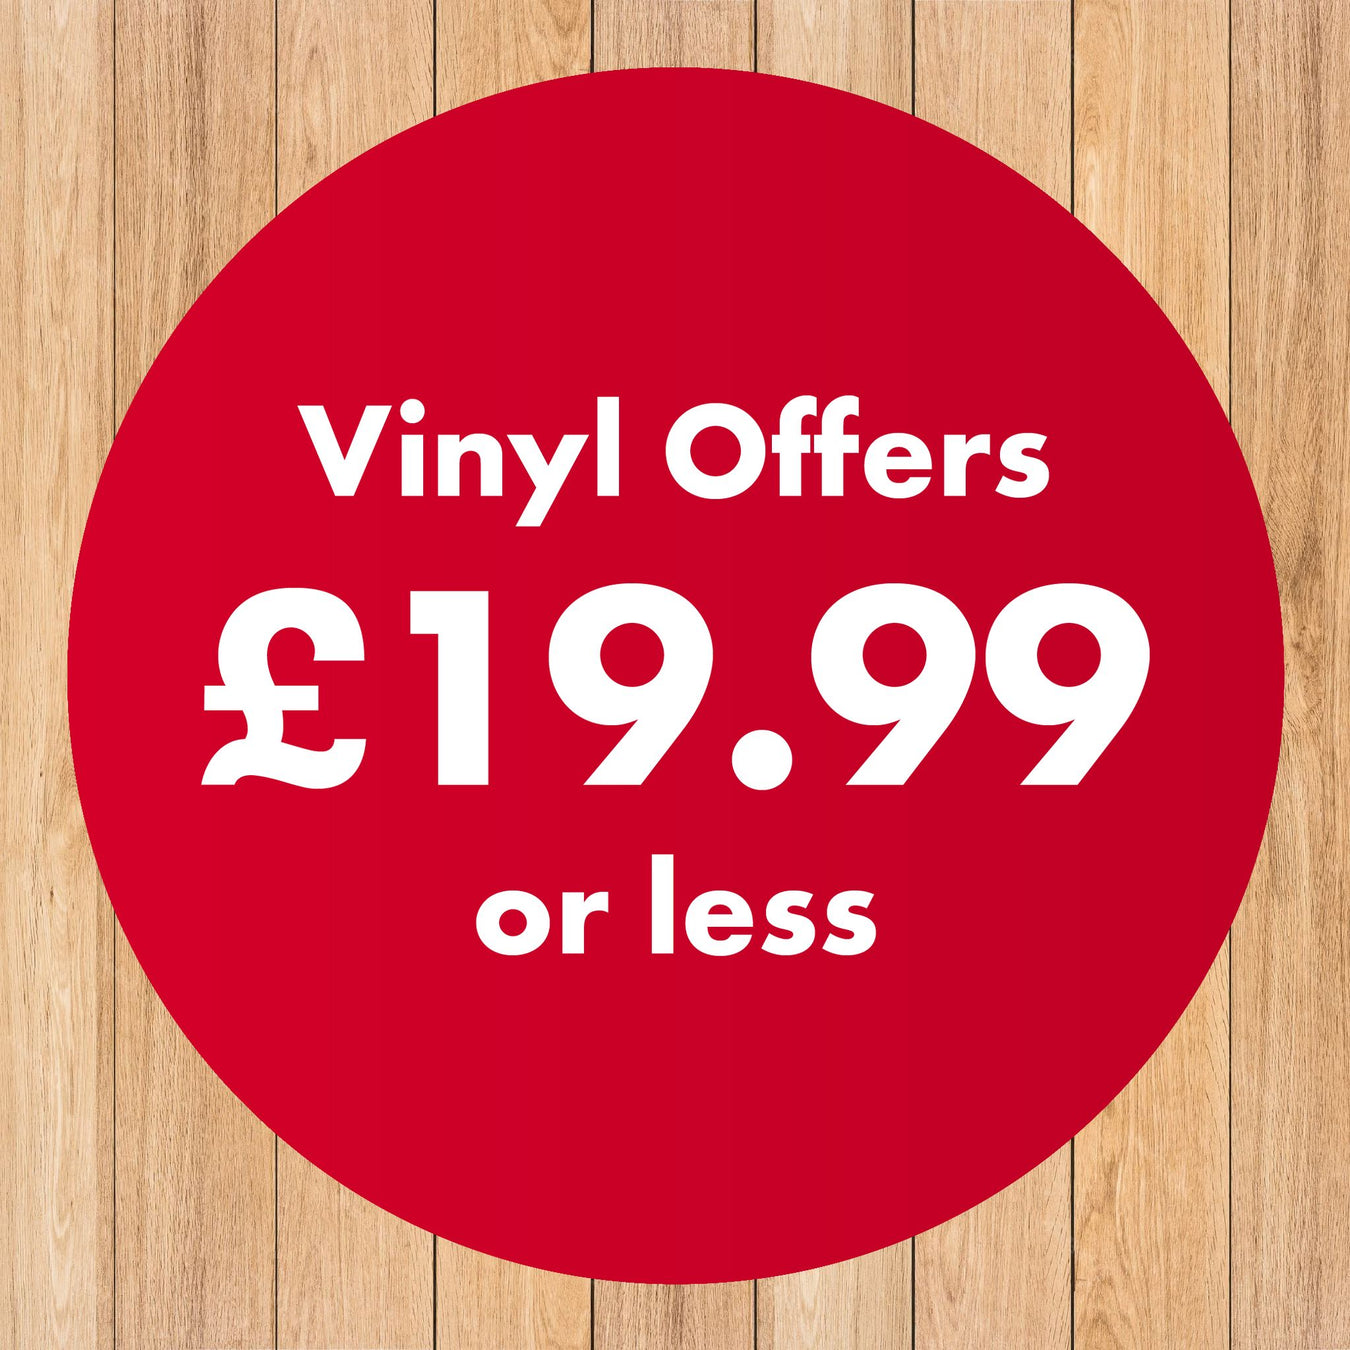 Vinyl Offers @ £19.99 or less